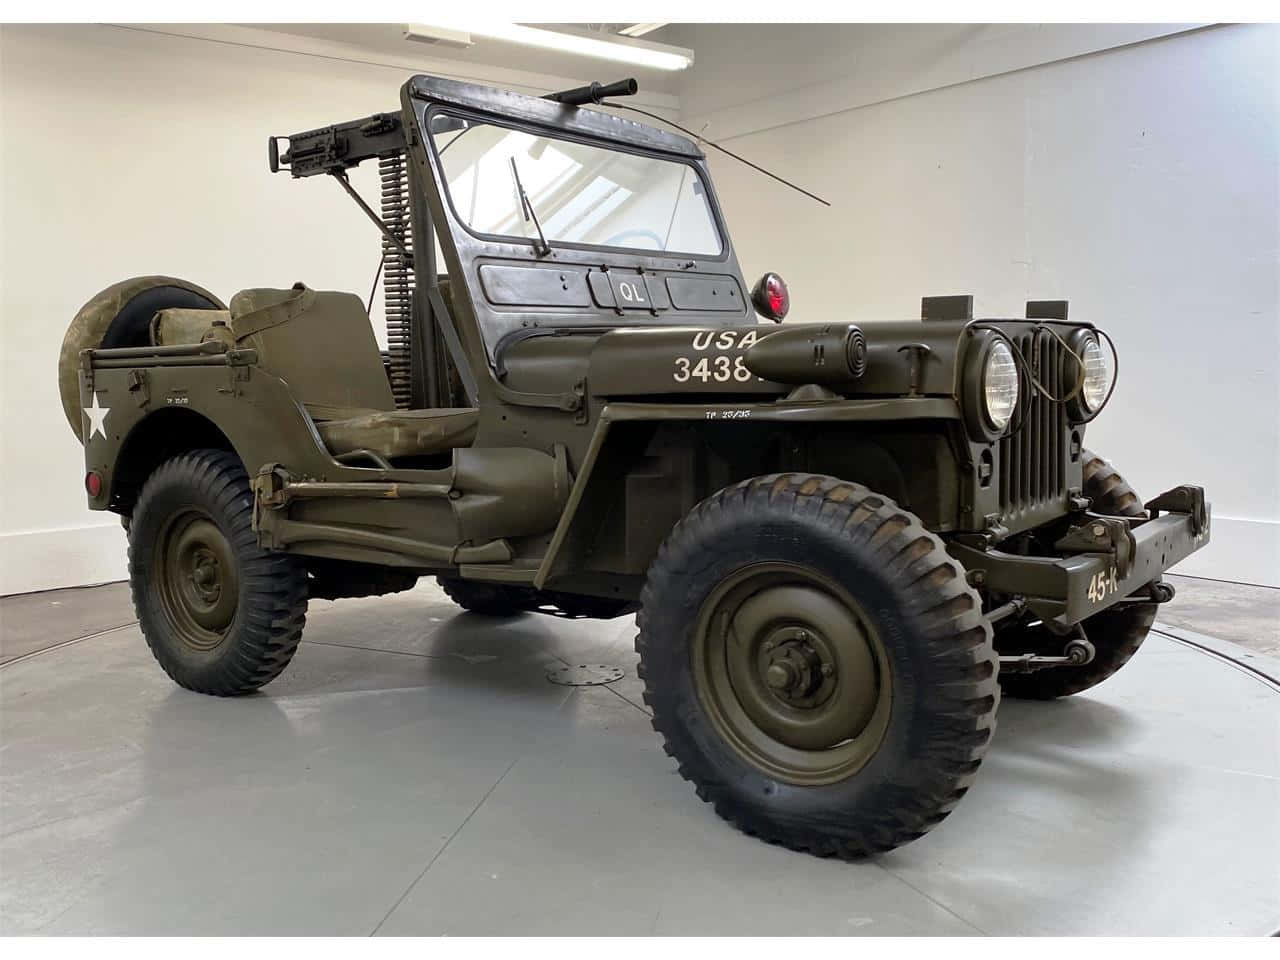 Classic Jeep Willys in its glory Wallpaper